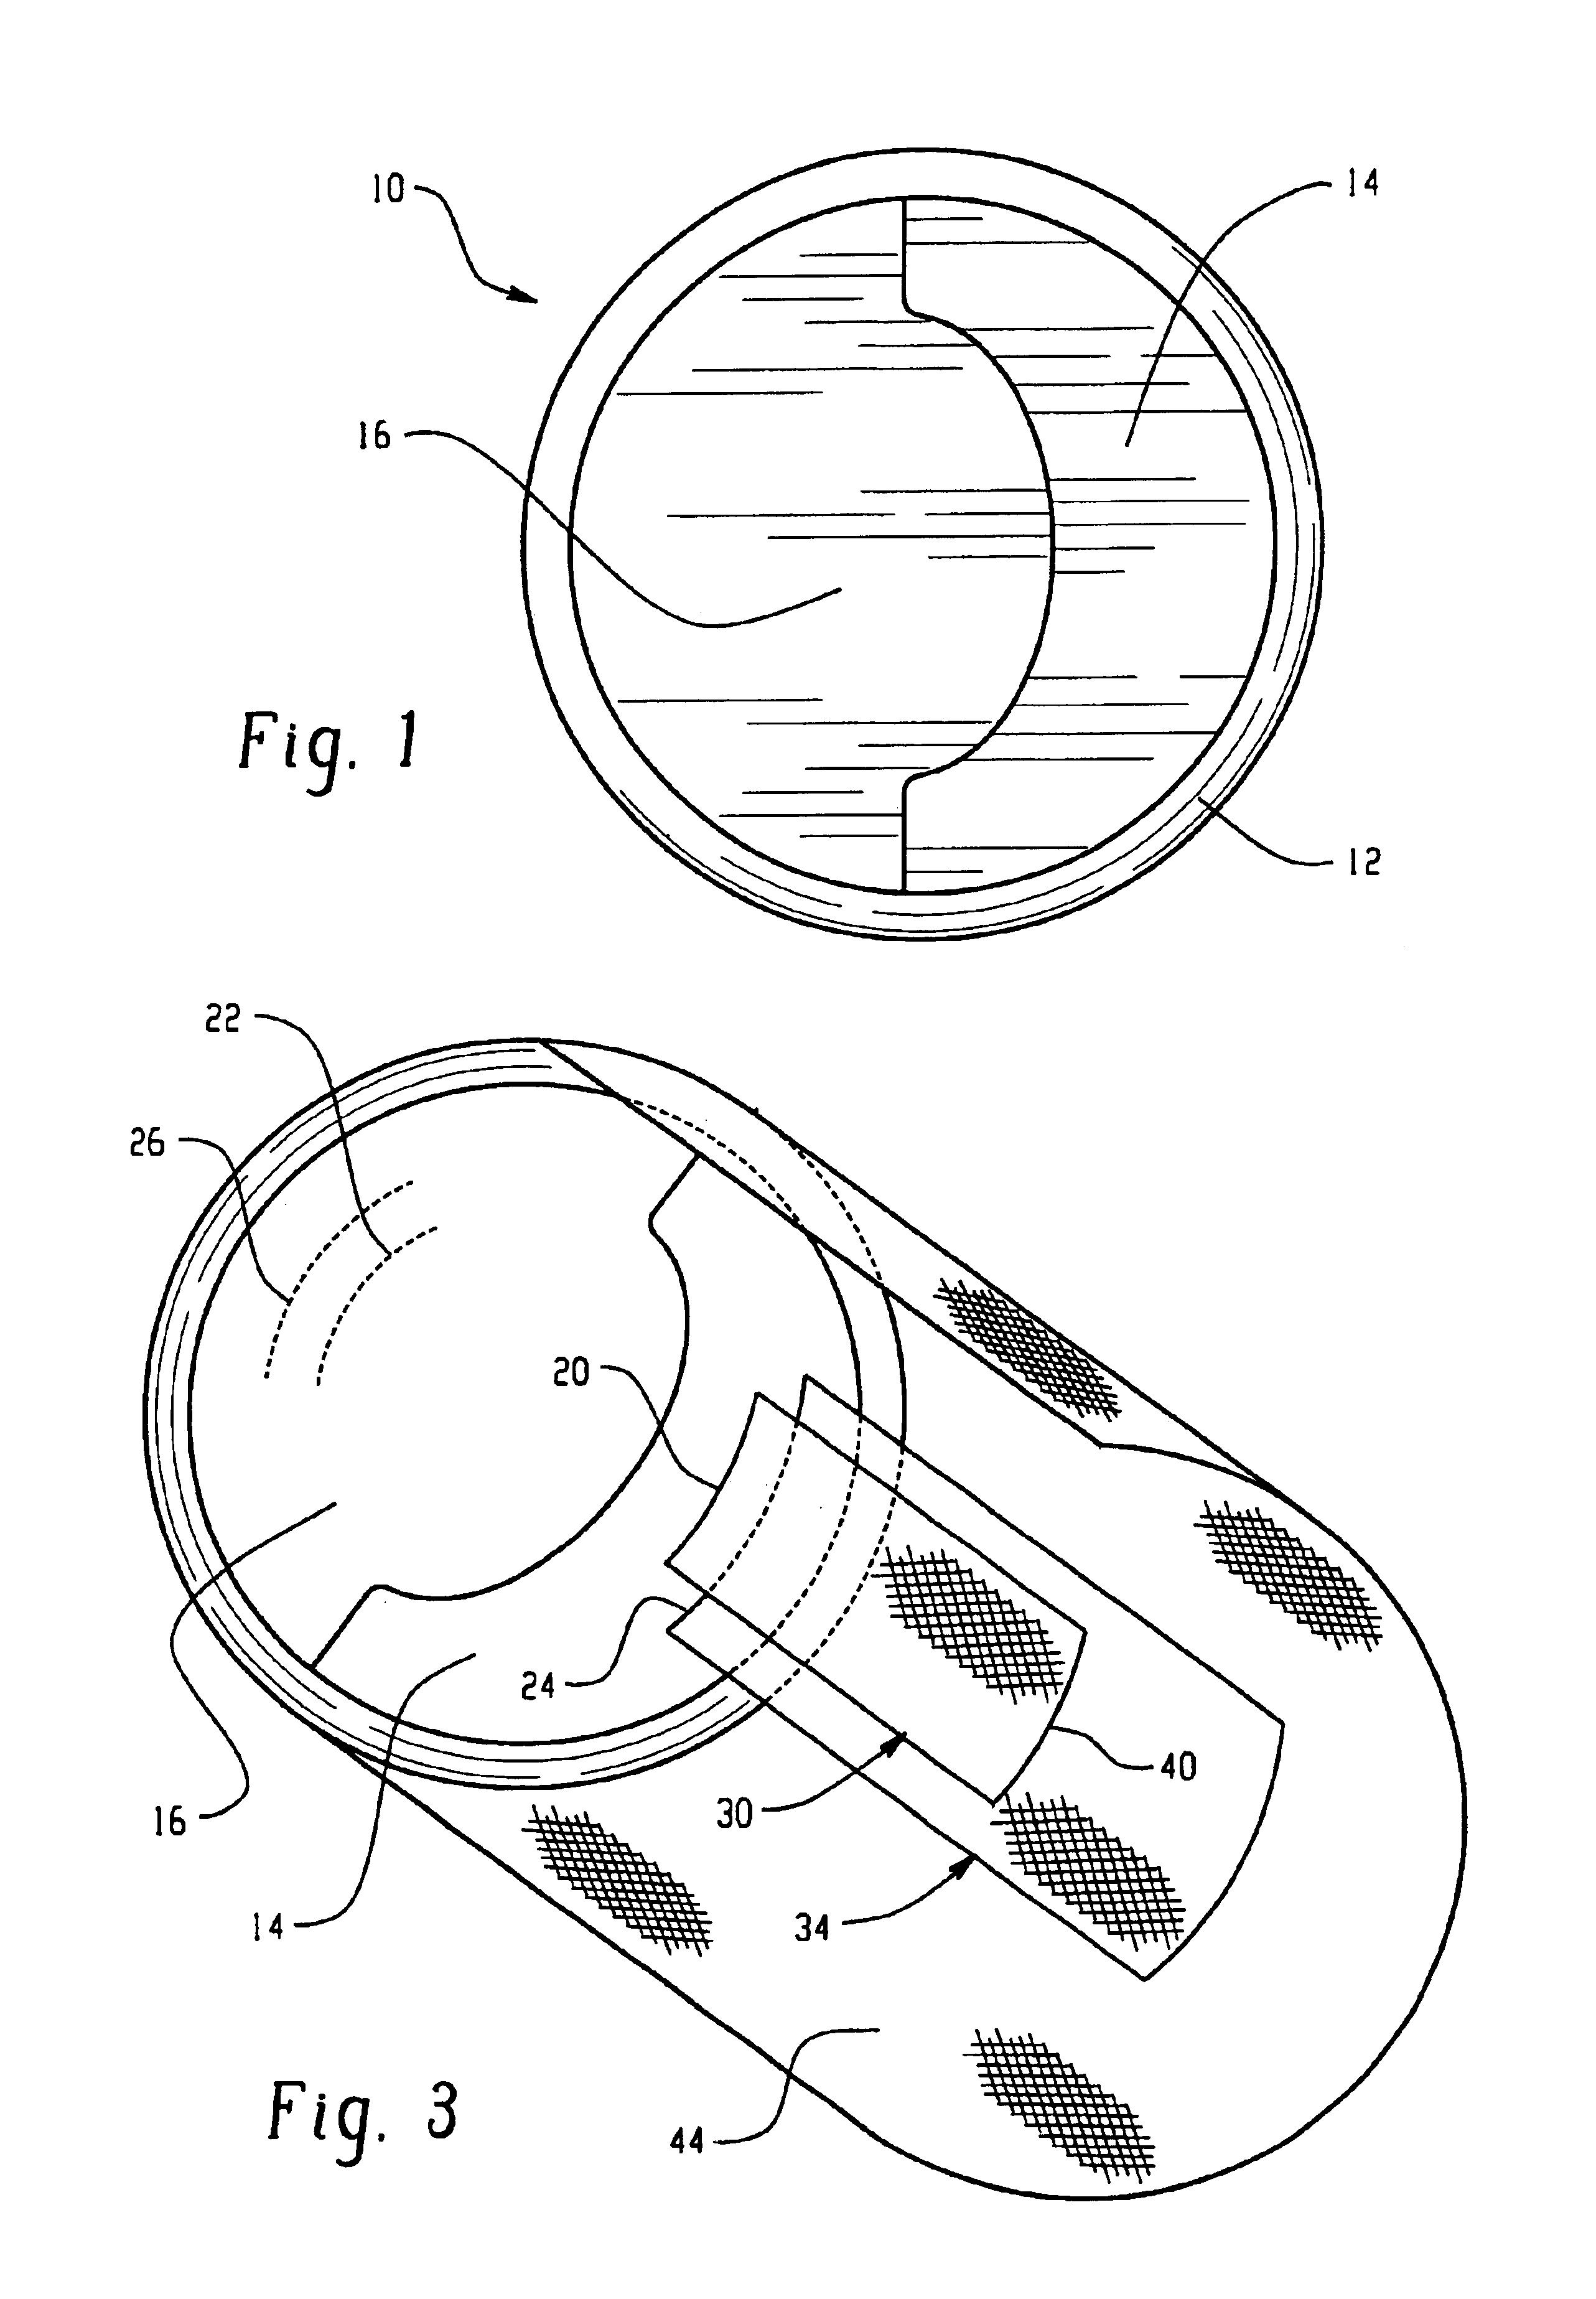 Replacement mitral valve